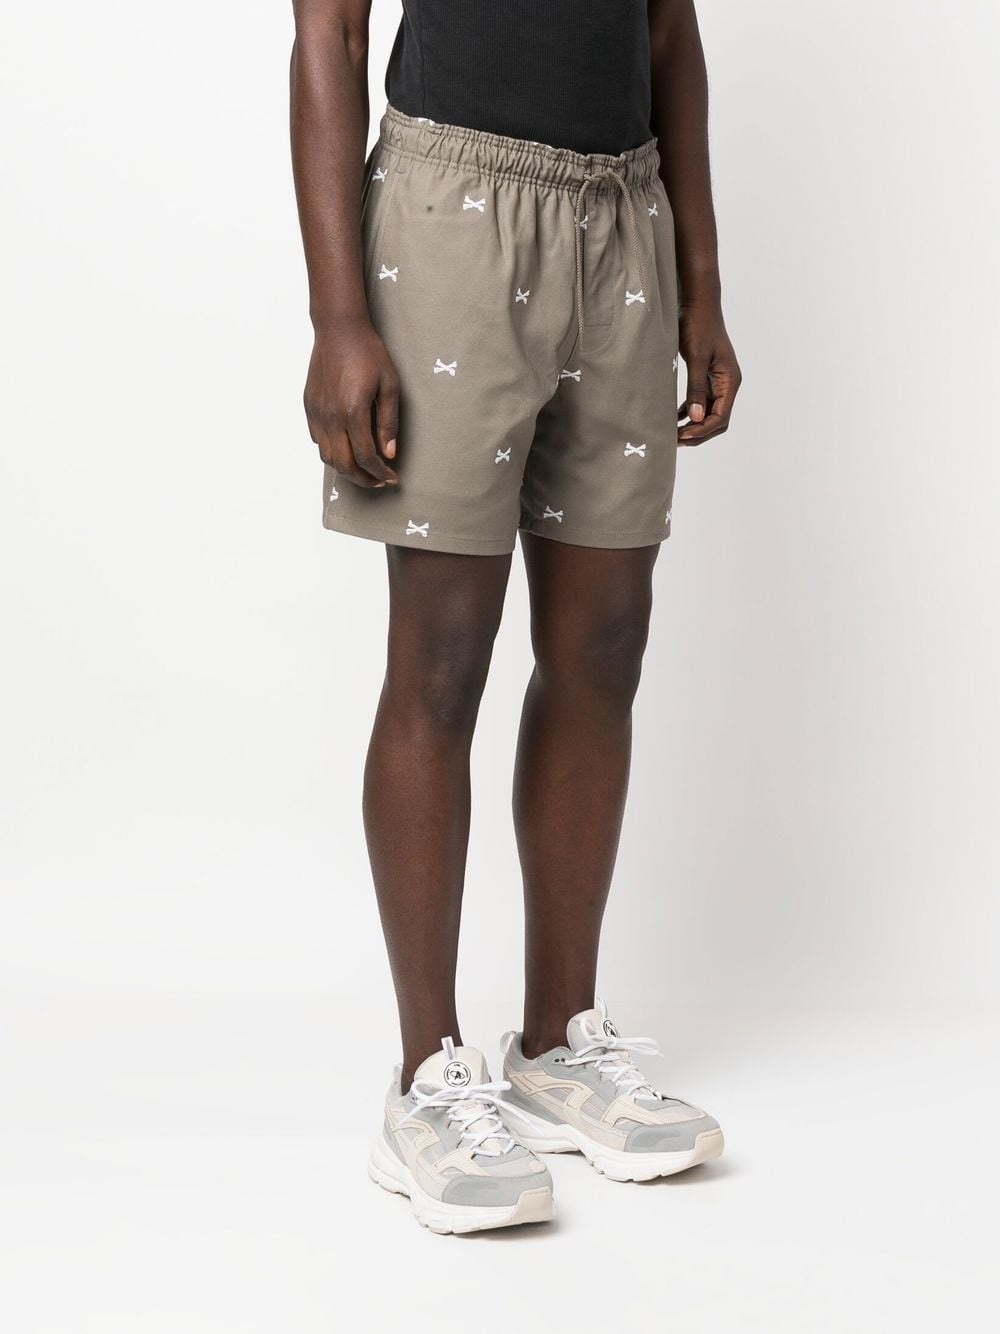 Seagull 01 embroidered track shorts - 3